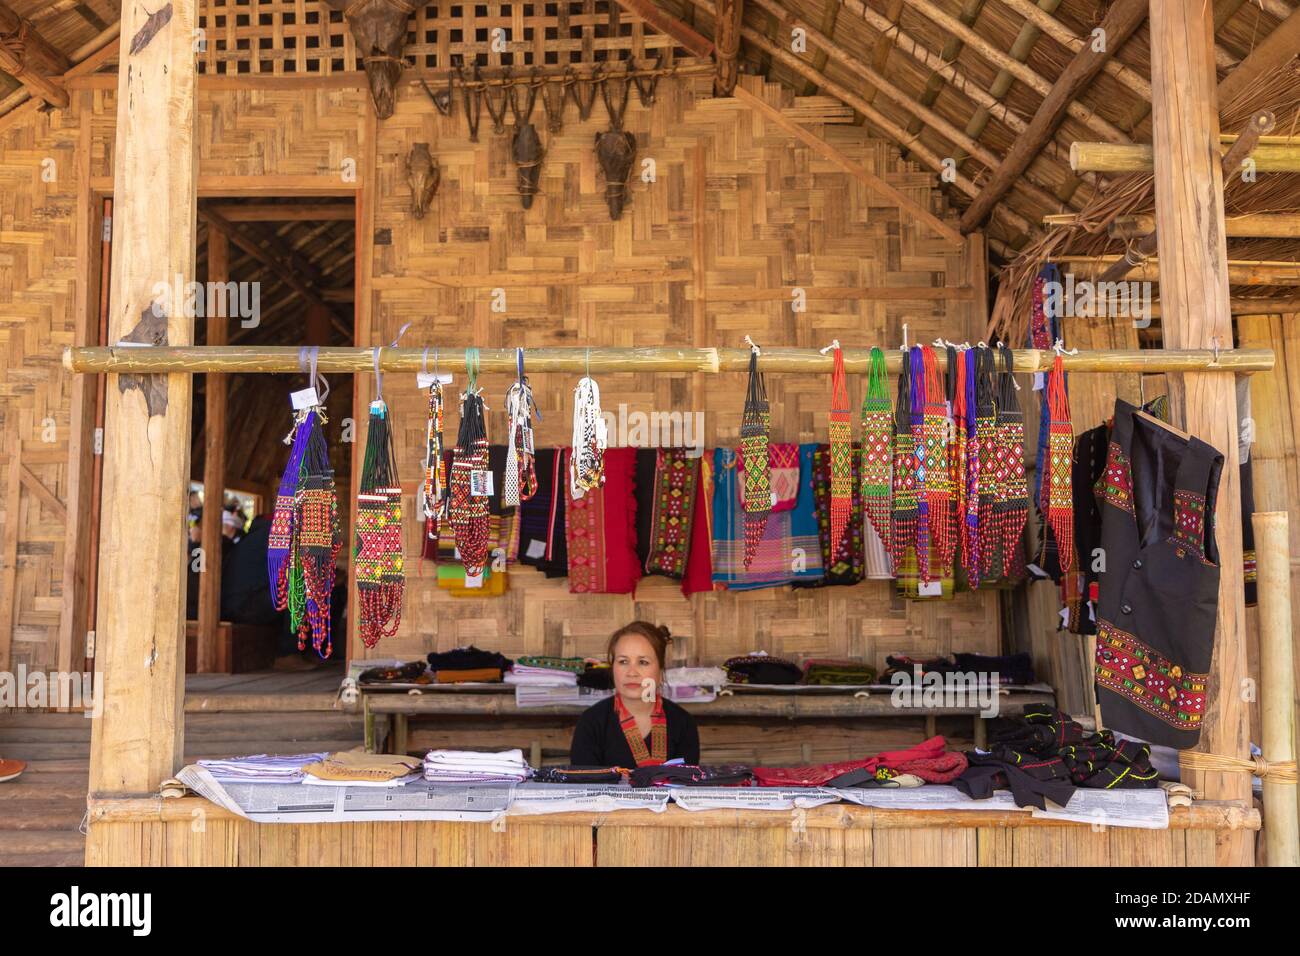 A Nagamese shopkeeper selling local traditional merchandise in a woodwn stall at Hornbill festival at Kisama Nagaland India on 4 December 2016 Stock Photo